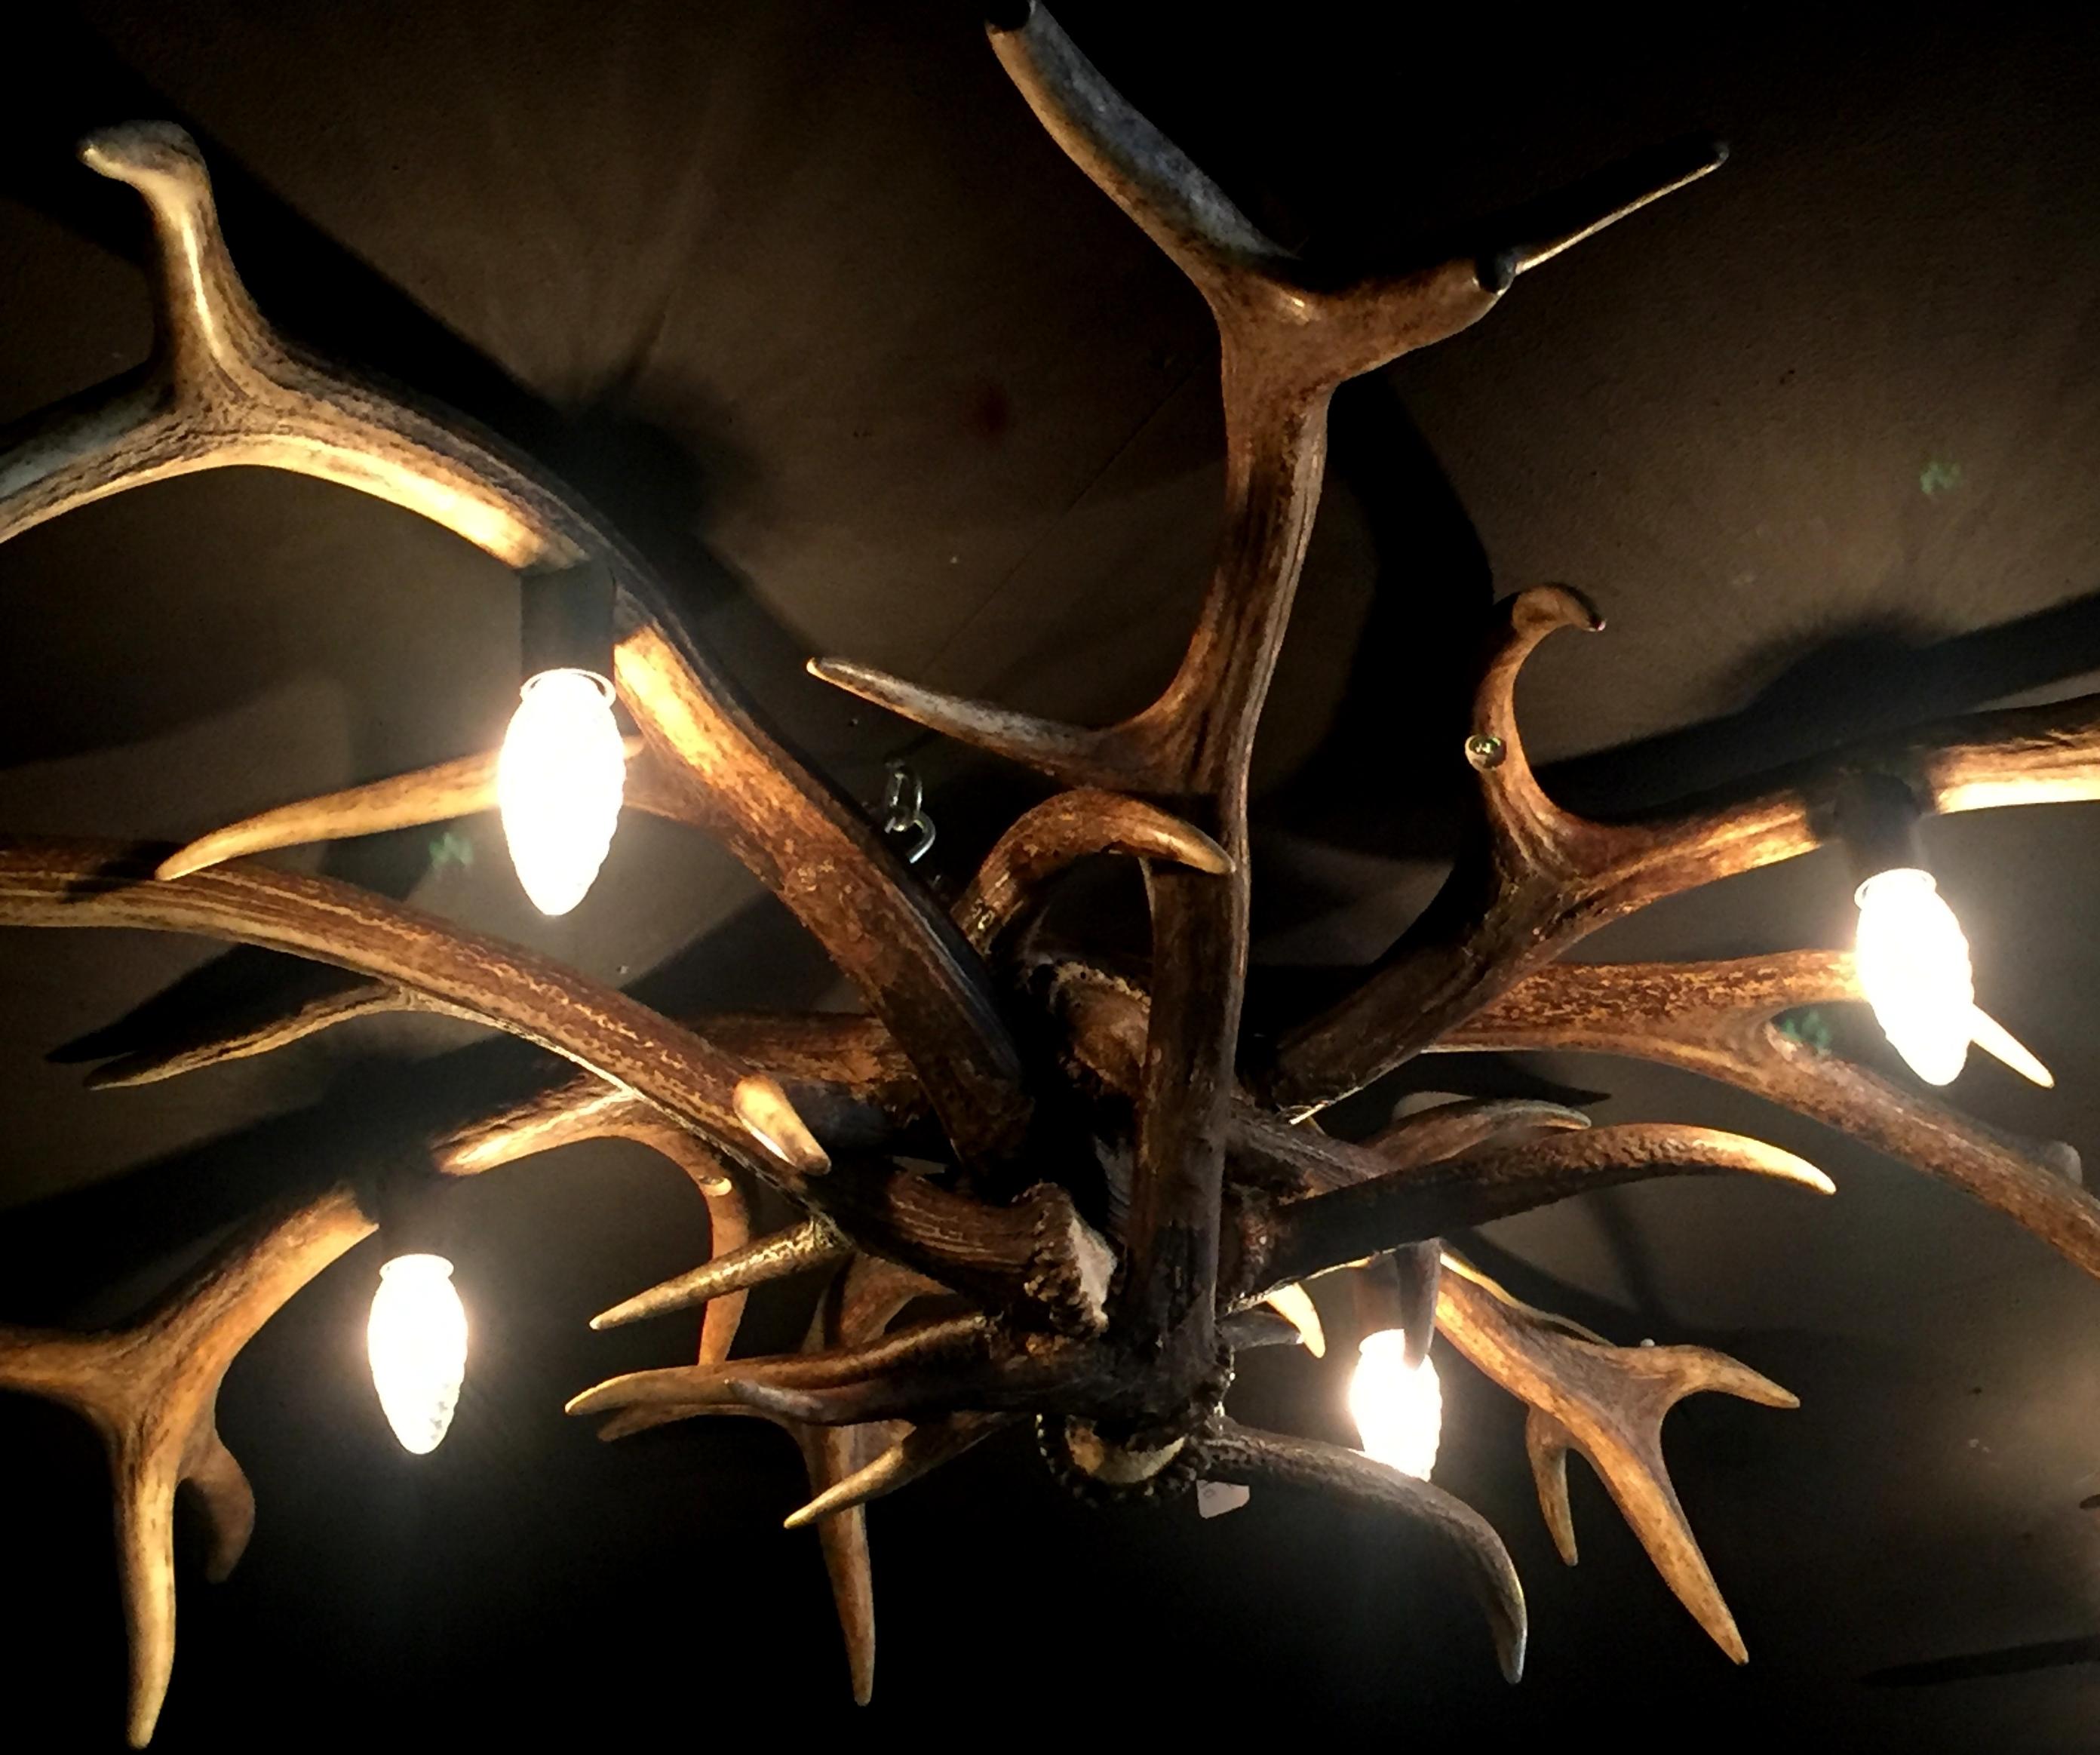 Modern chandelier made of antlers (PG 102-B). The plafoniere is made of red stag antler.
The electrical wiring is concealed in the antlers and the quality of our chandeliers is really high. We can make any antler chandelier entirely according to